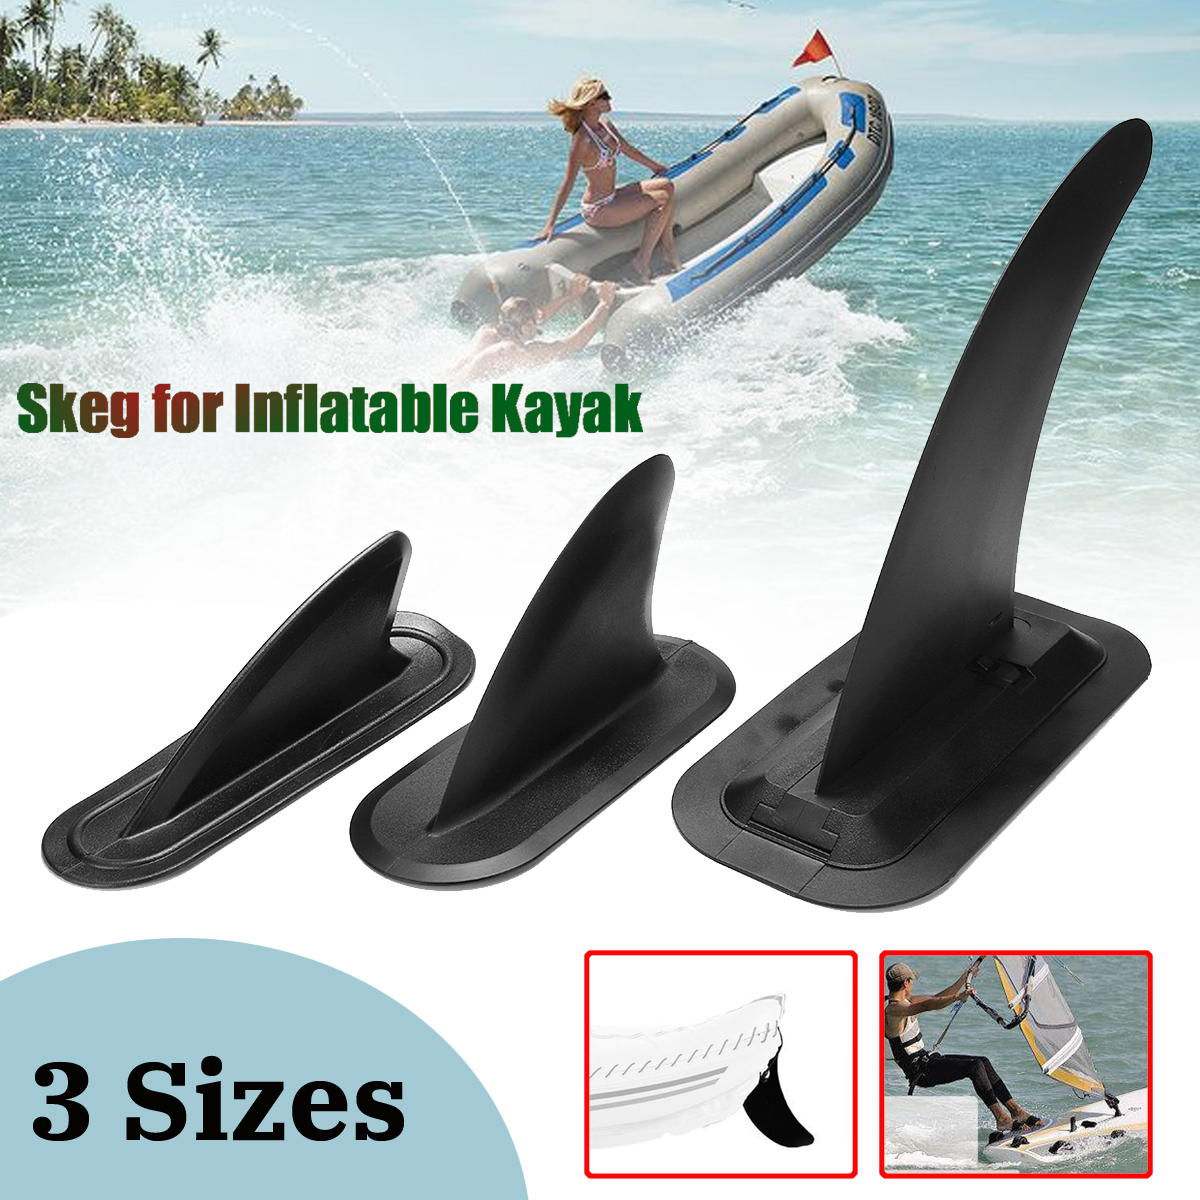 1x Replace Kayak Skeg Fin For Inflatable Canoe Boat Dinghy Spare Accessories 